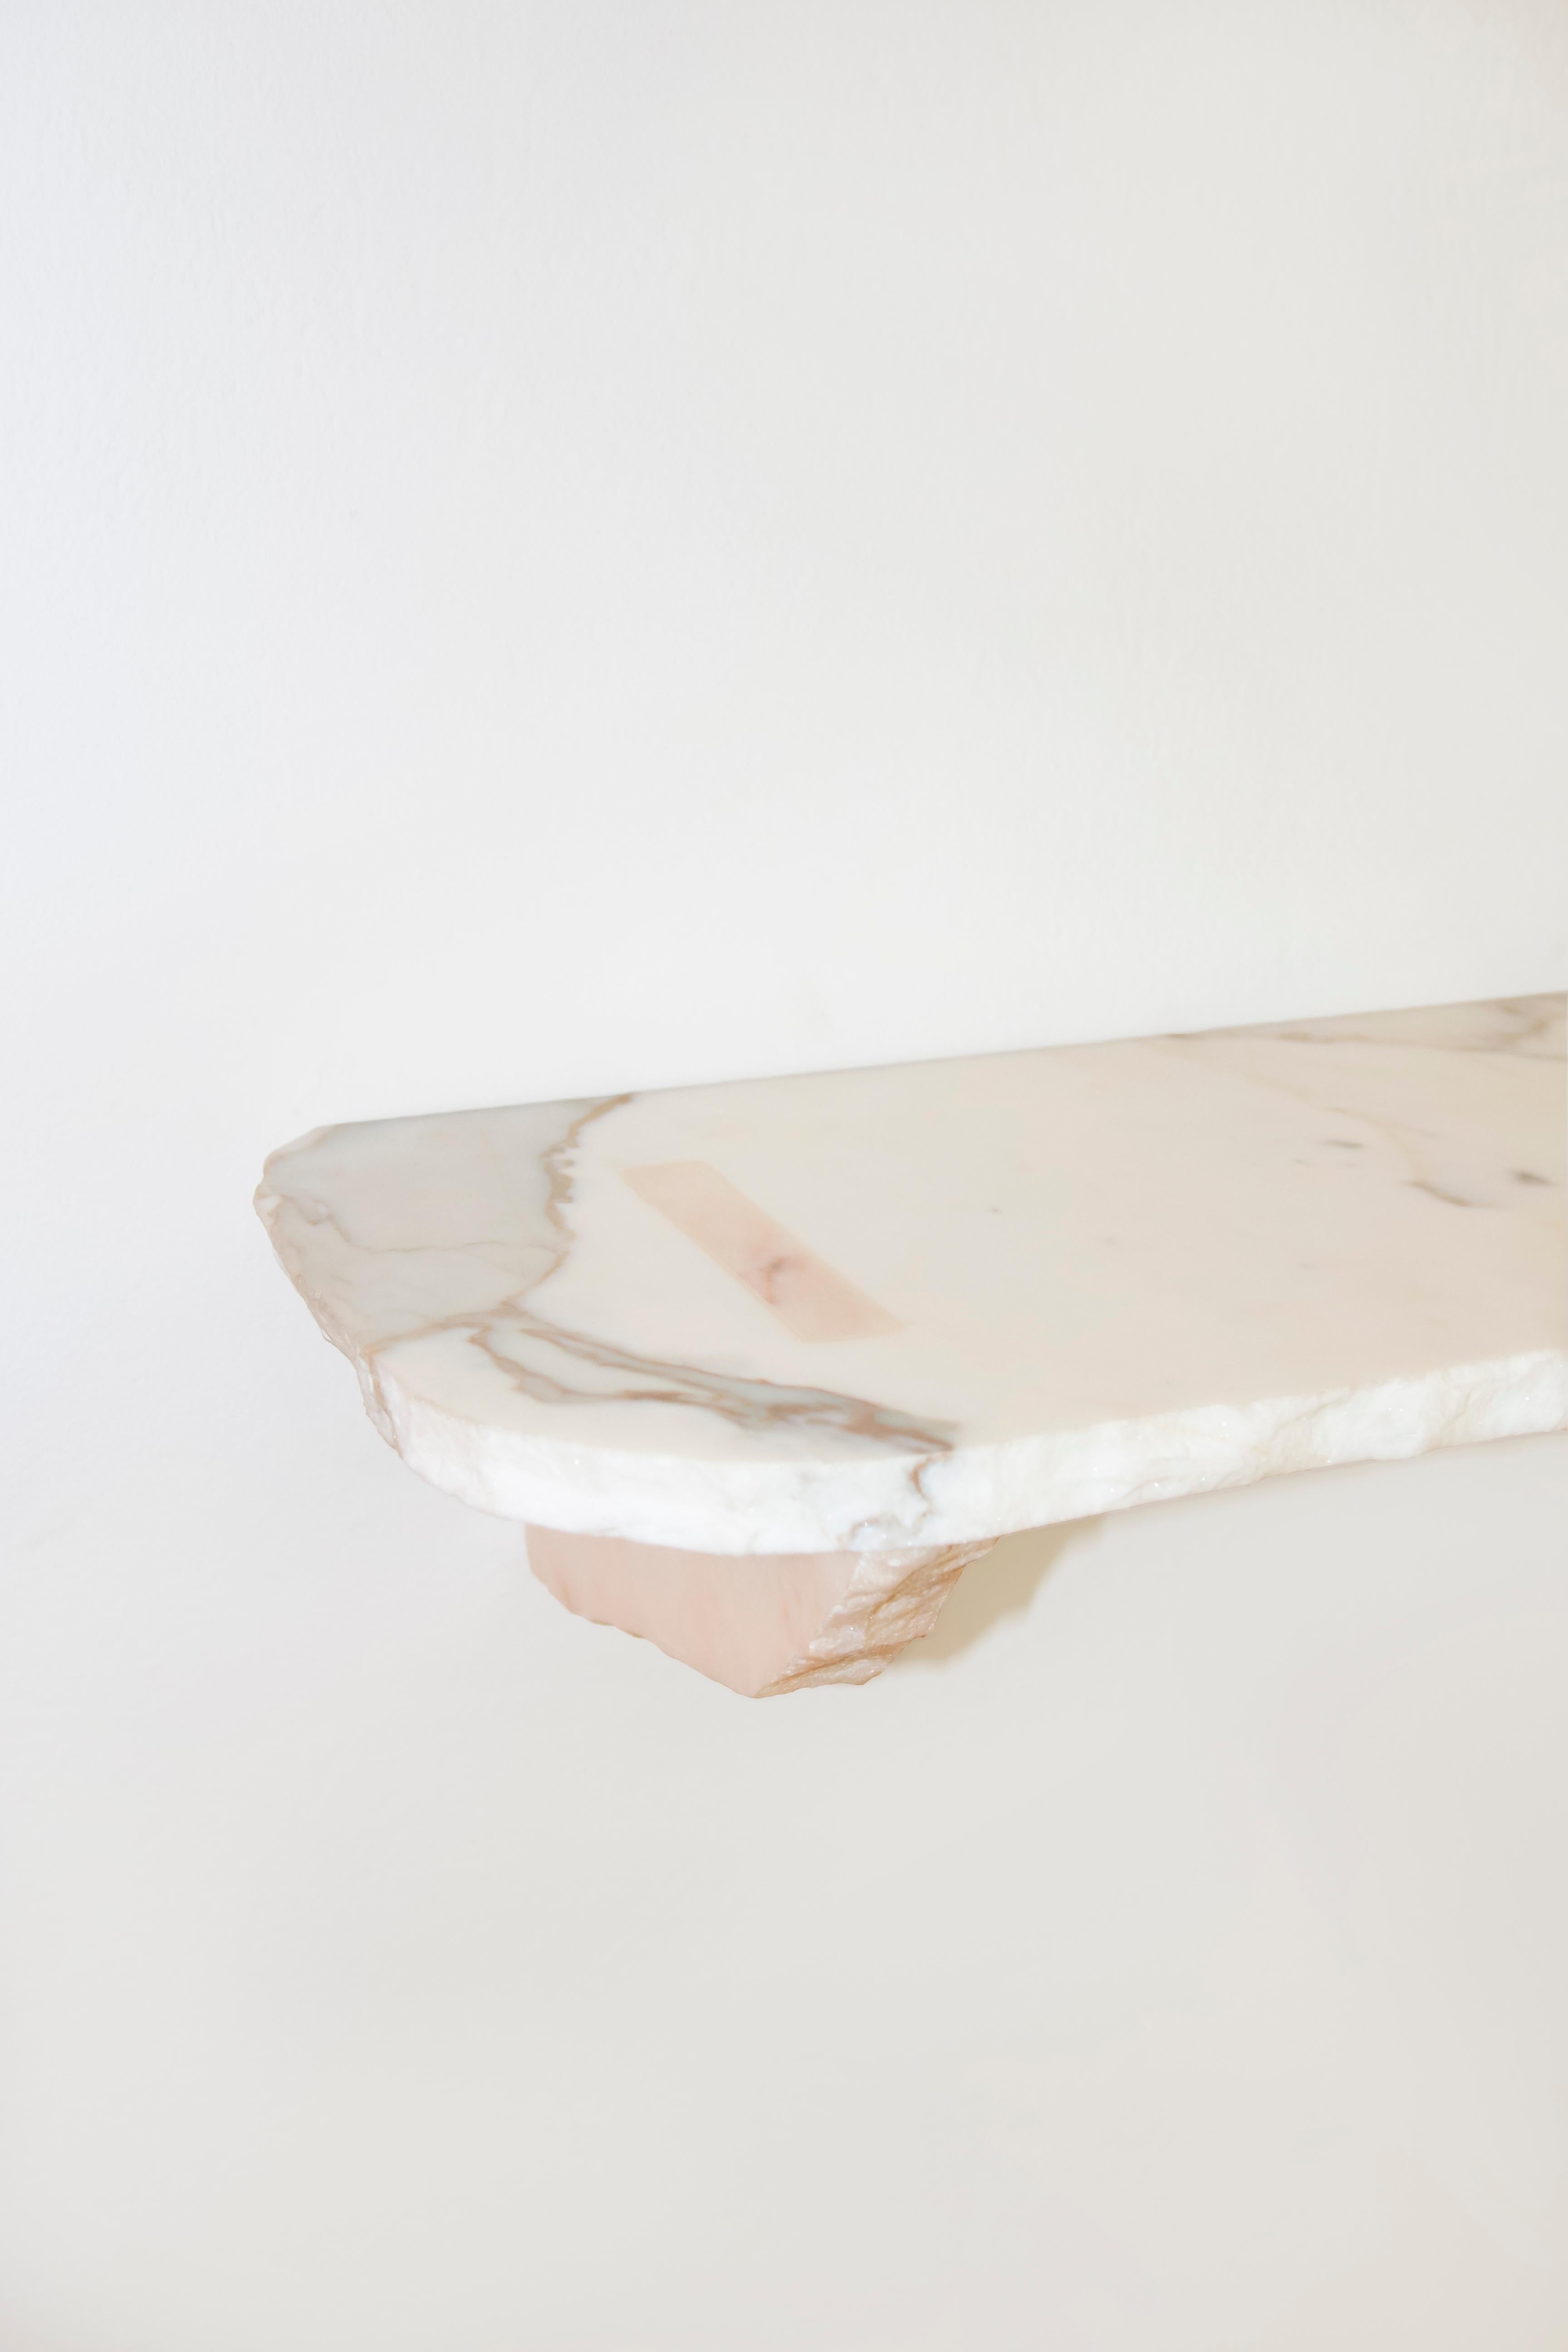 21st Century Contemporary Mixed Marble Shelf Handmade Italy by Ilaria Bianchi For Sale 2